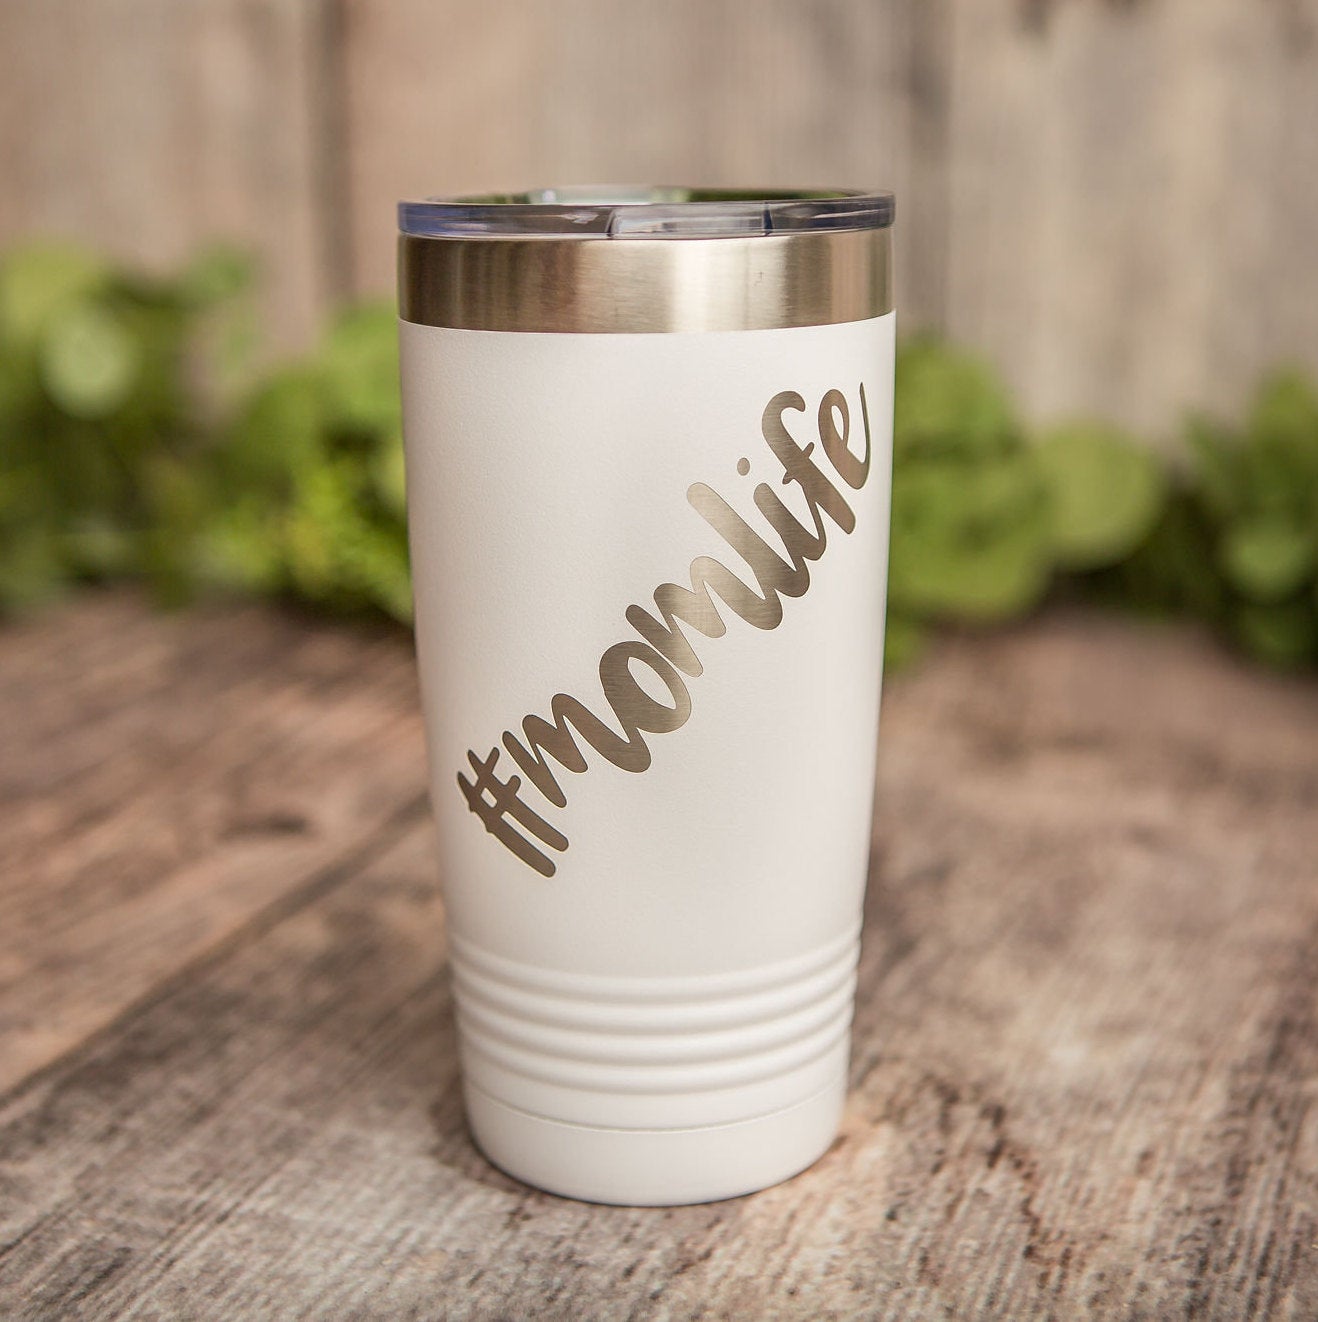 https://3cetching.com/wp-content/uploads/2020/09/momlife-engraved-stainless-steel-tumbler-momlife-yeti-style-cup-mom-birthday-gift-5f5fabae.jpg